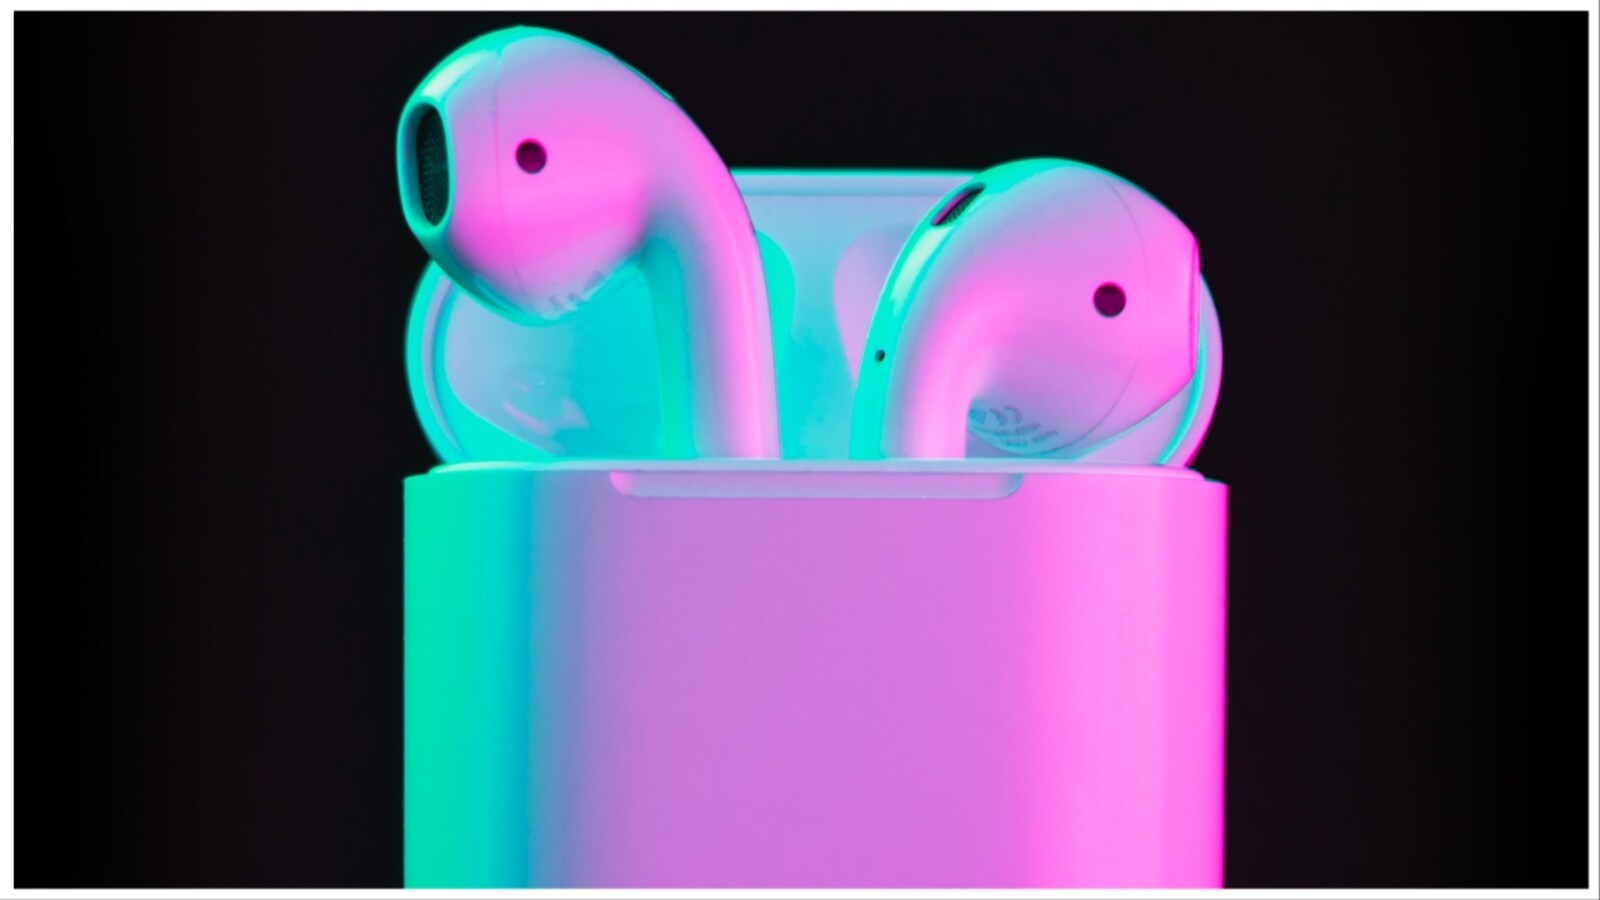 Airpods in at full blast #college #collegelife #fyp